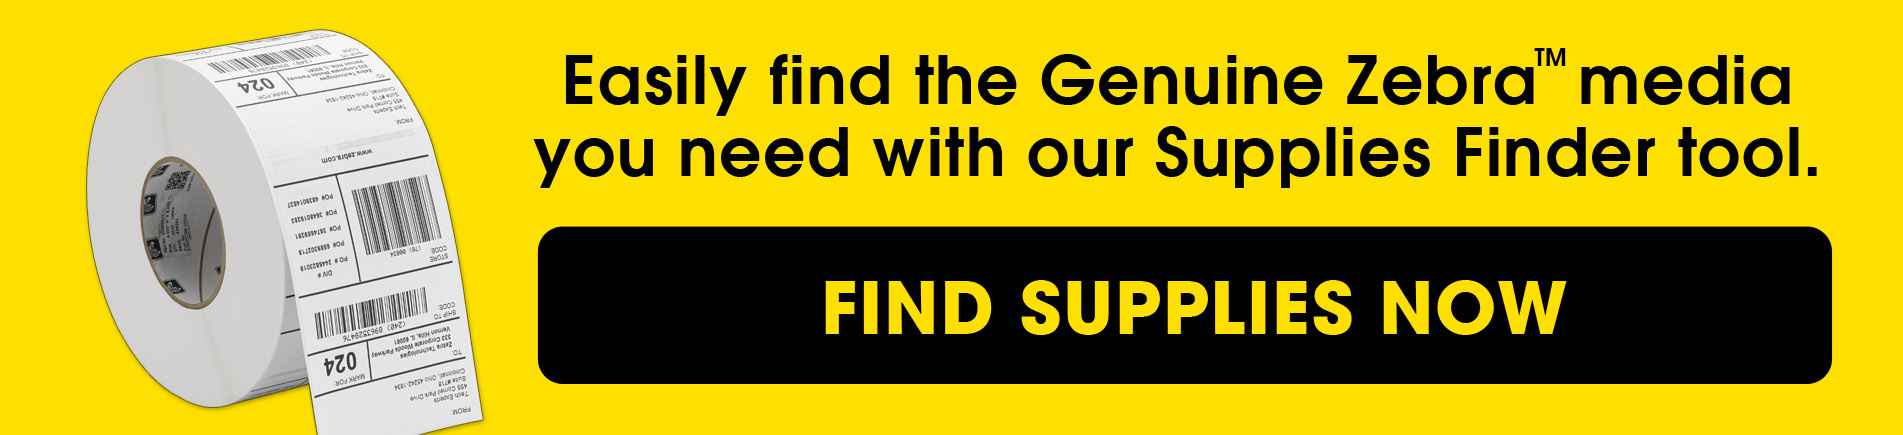 Easily find the Genuine Zebra media you need with our Supplies Finder tool.